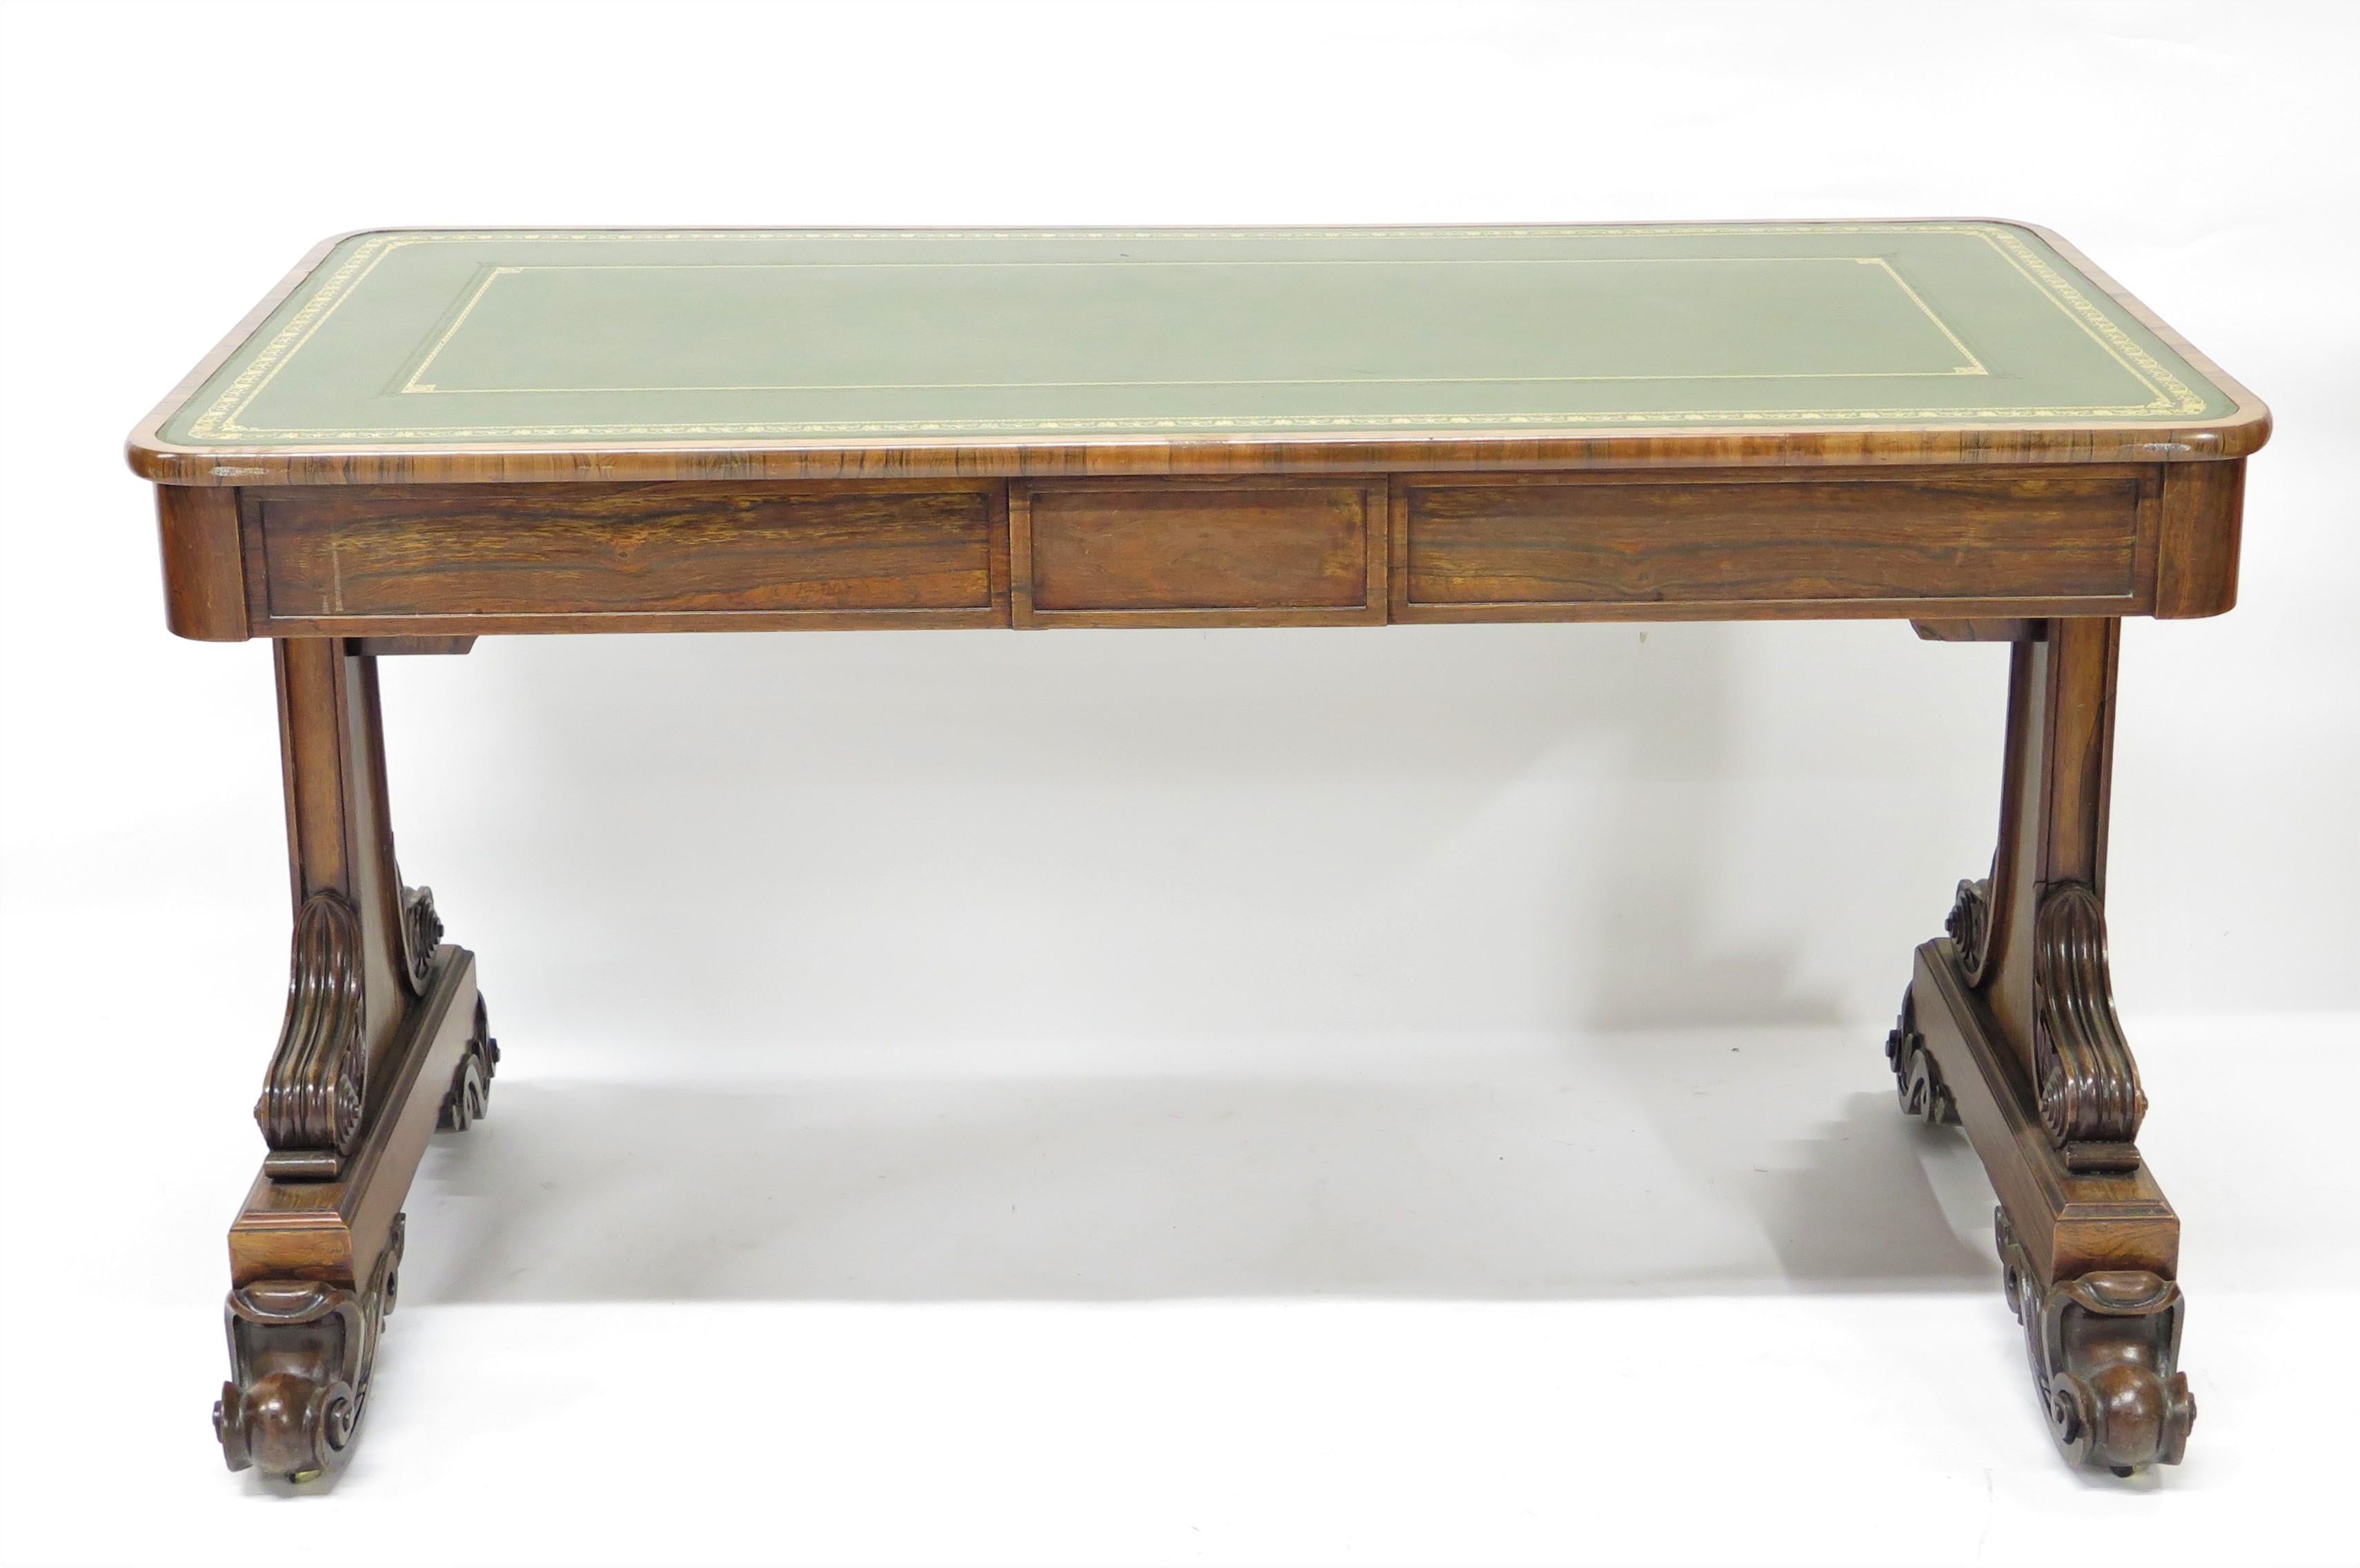 a William IV rosewood library table / writing desk with gilt embossed decoration and border on green leather work surface, two drawers on one side, the whole on castors, England, circa 1830s